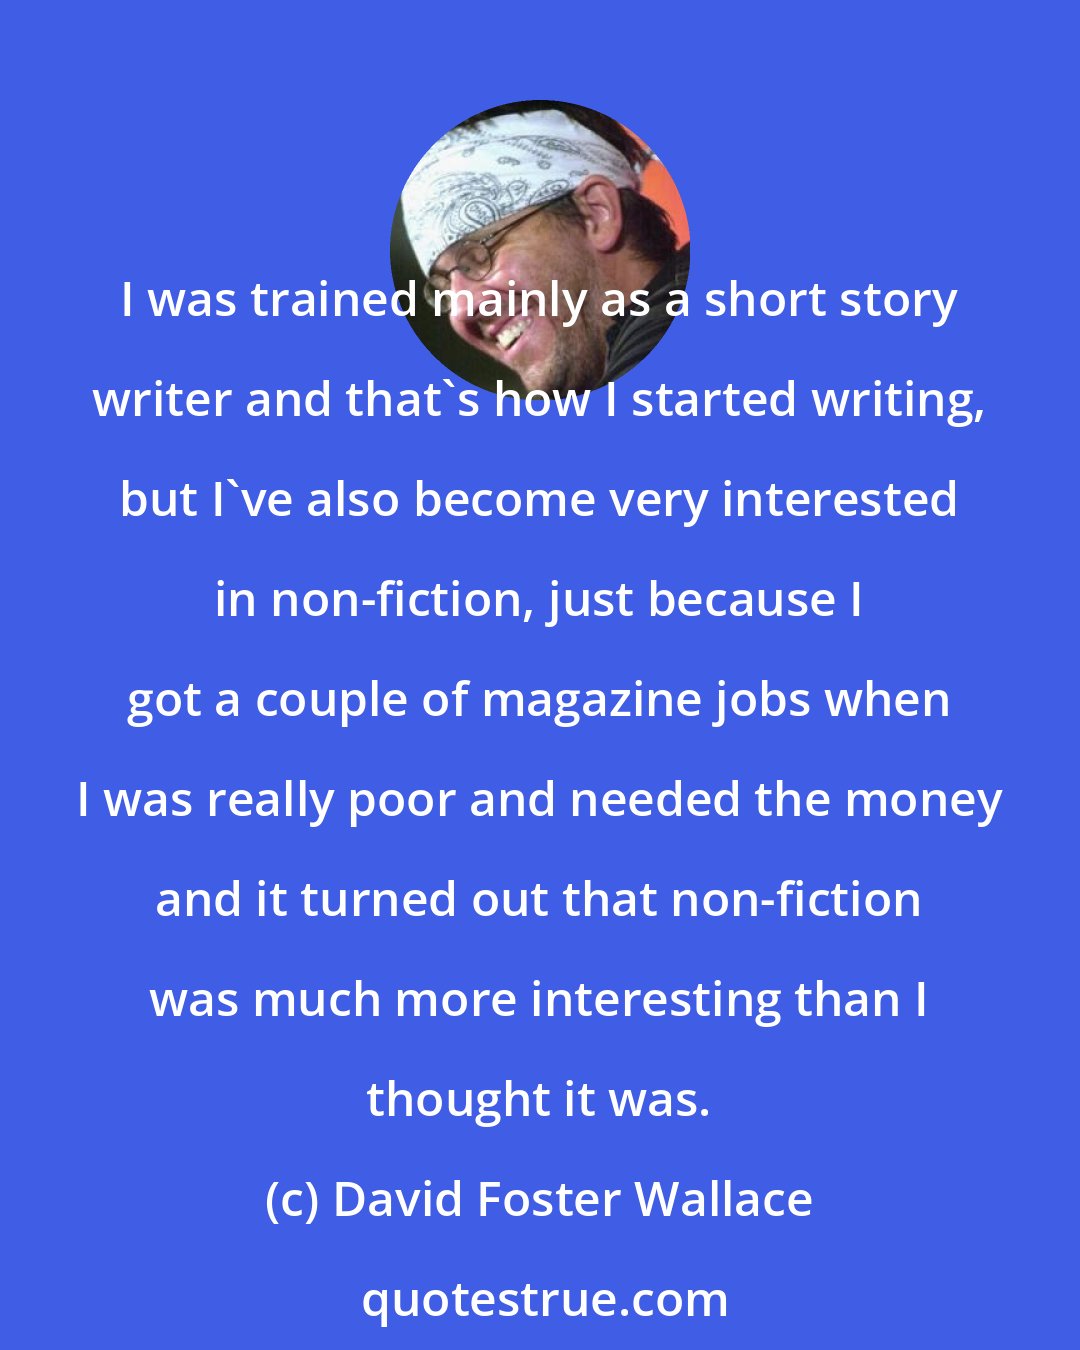 David Foster Wallace: I was trained mainly as a short story writer and that's how I started writing, but I've also become very interested in non-fiction, just because I got a couple of magazine jobs when I was really poor and needed the money and it turned out that non-fiction was much more interesting than I thought it was.